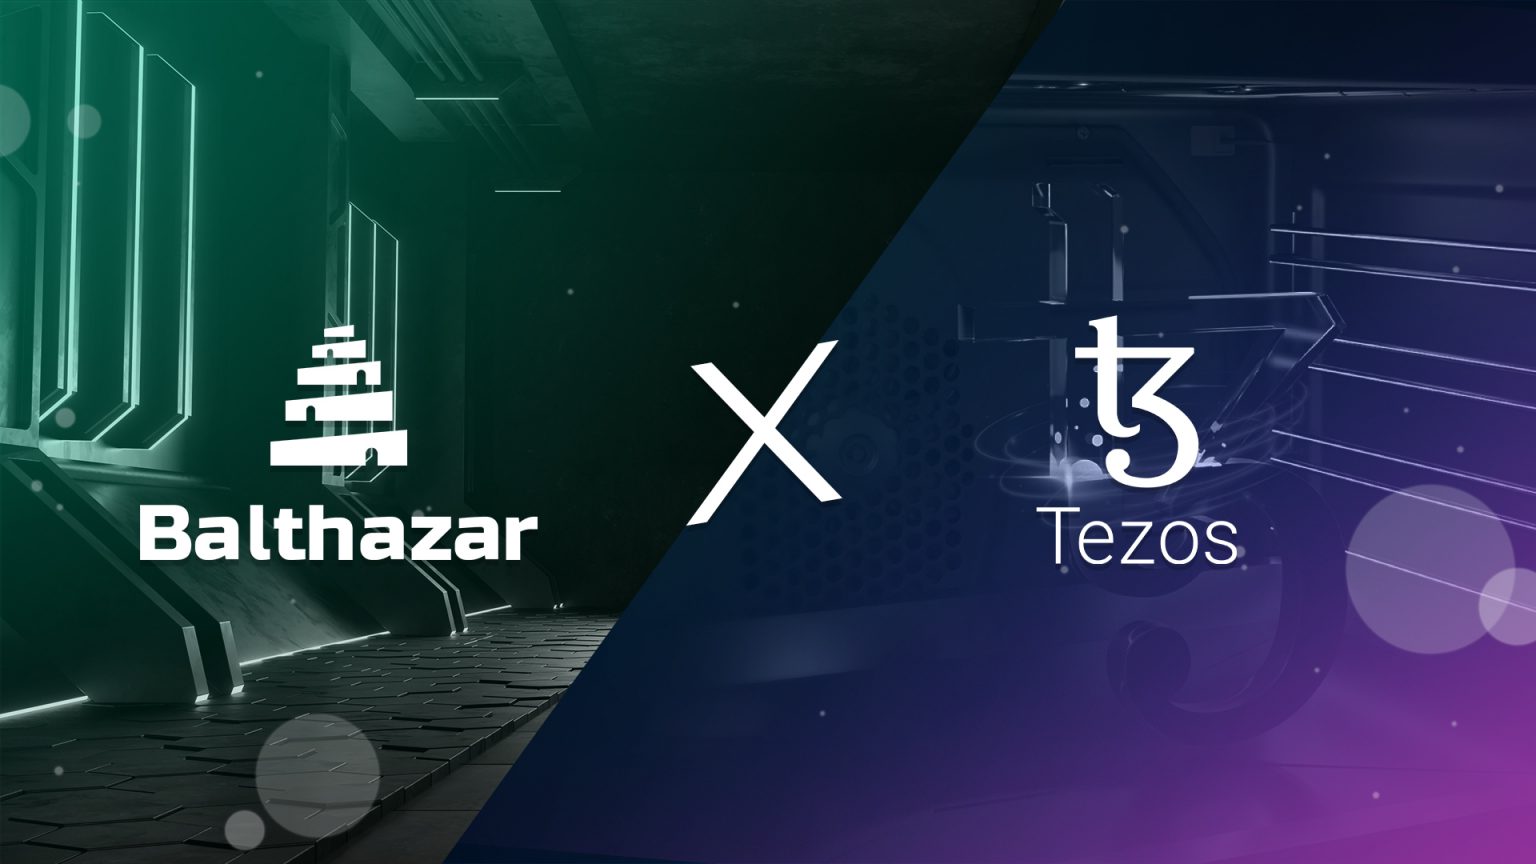 Balthazar DAO Launches New Gaming Infrastructure Babylon, Backed by Tezos Foundation